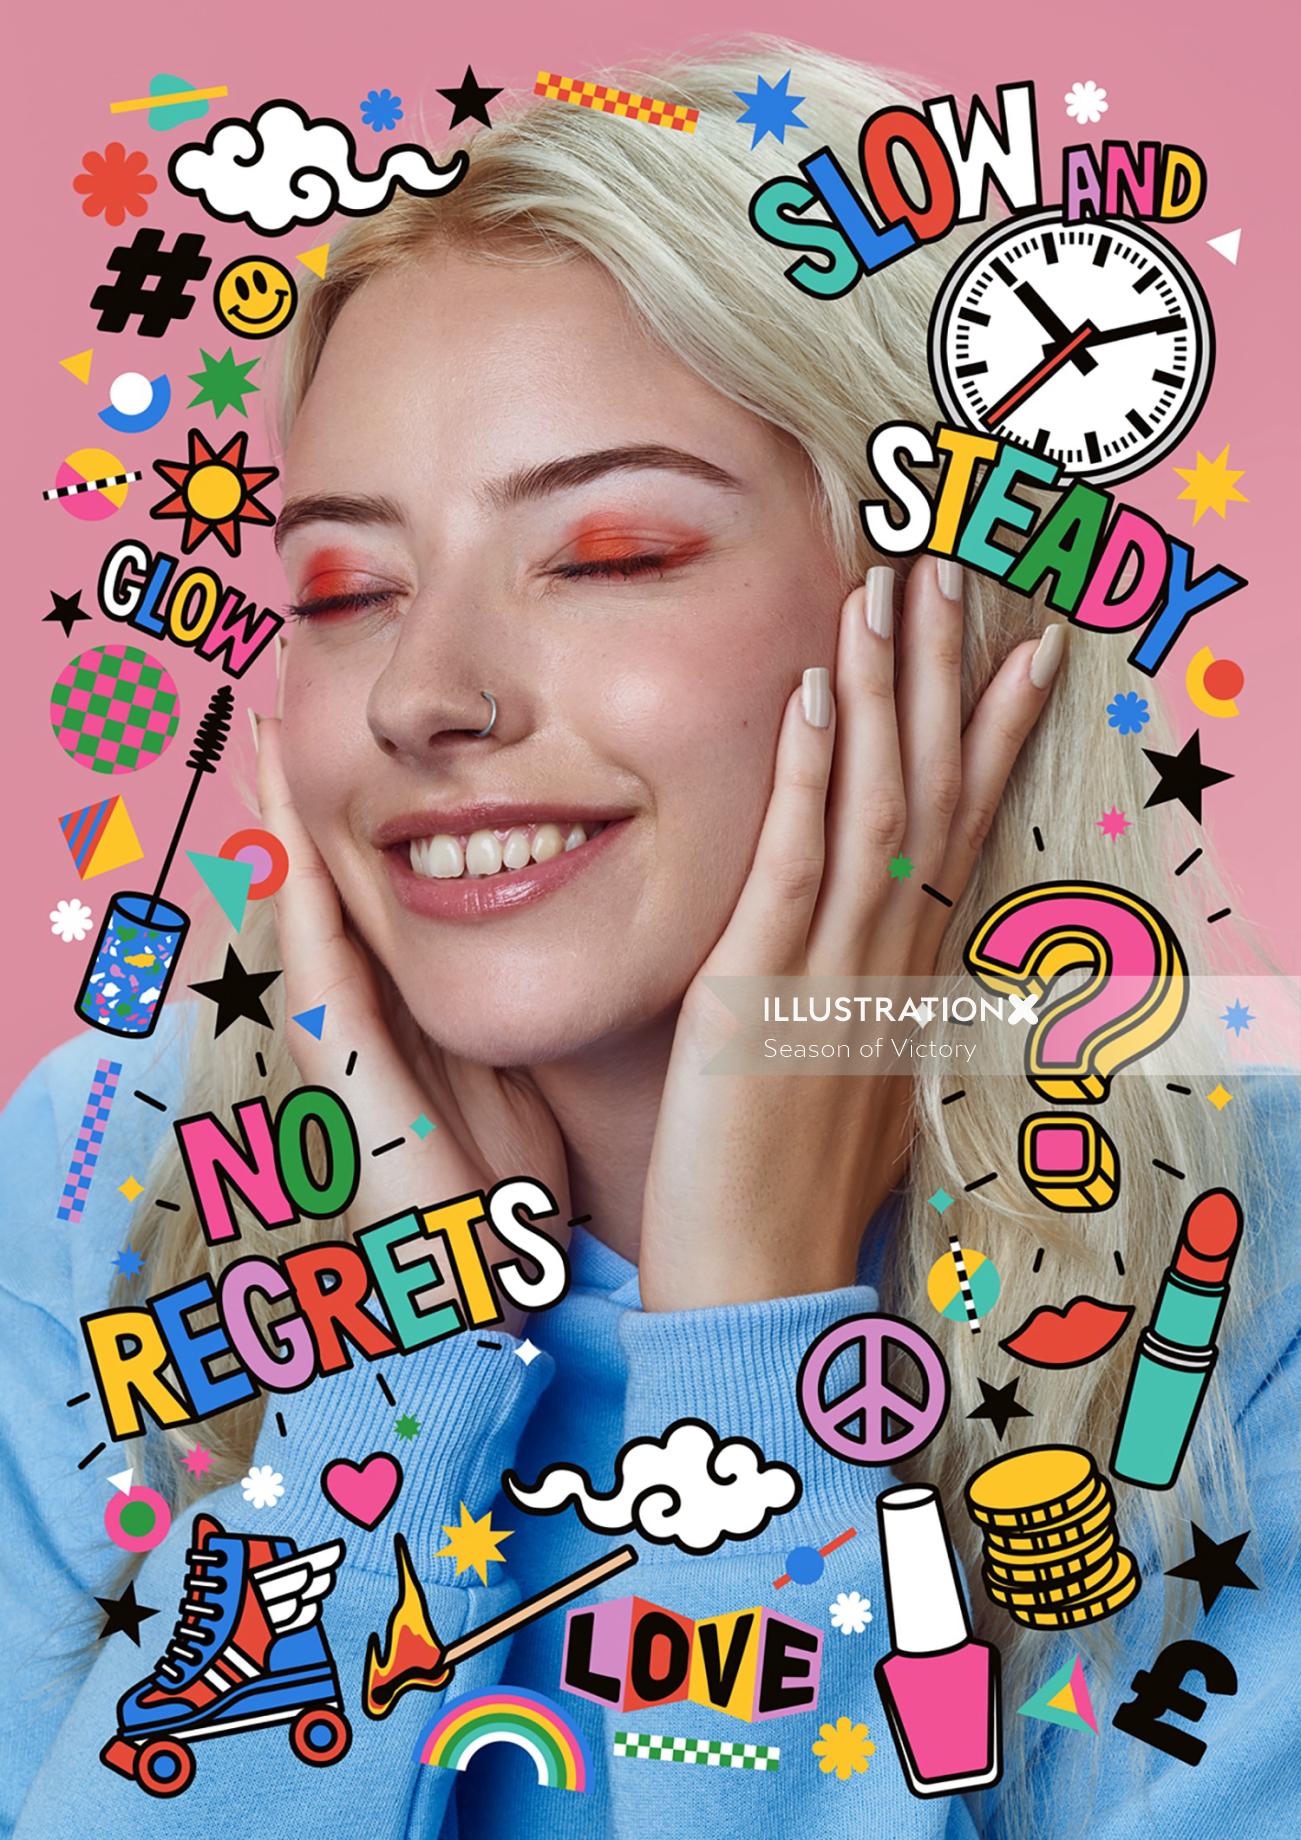 beauty, cosmetics, health & beauty, youth, youth culture, emotions, stickers, geofilters, geofilter,